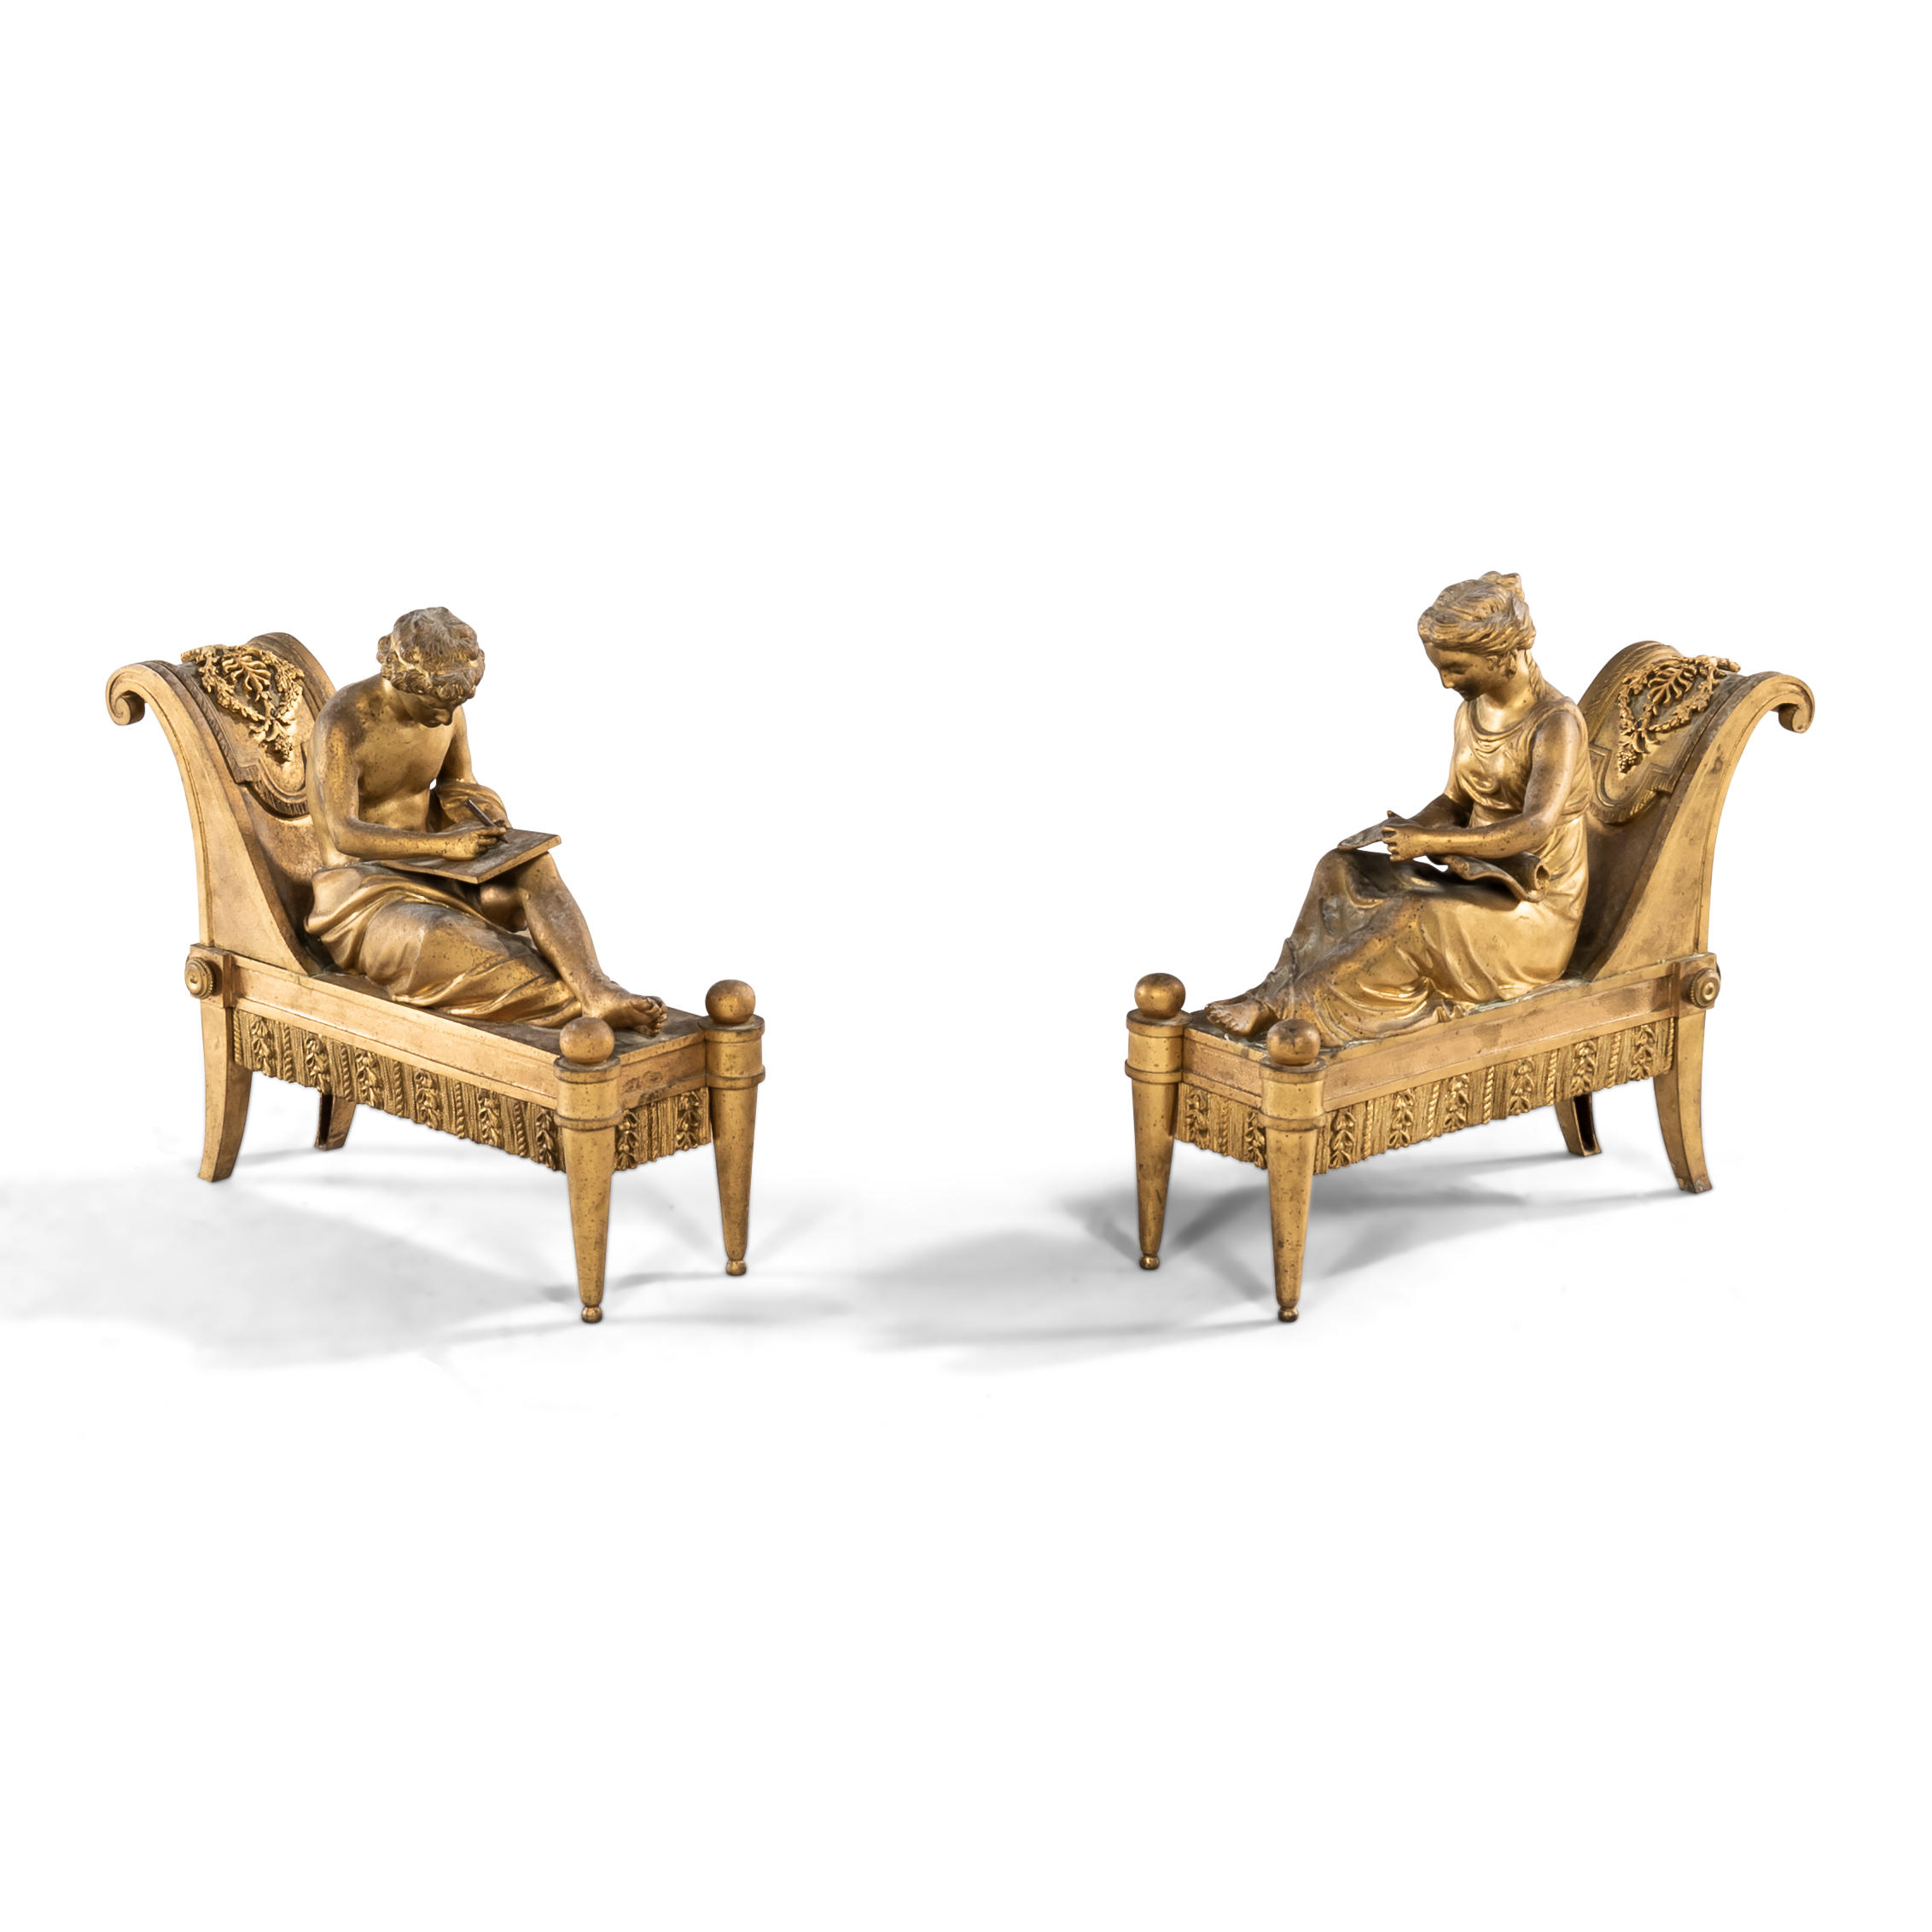 PAIR OF GILT BRONZE FIGURAL CHENETS,